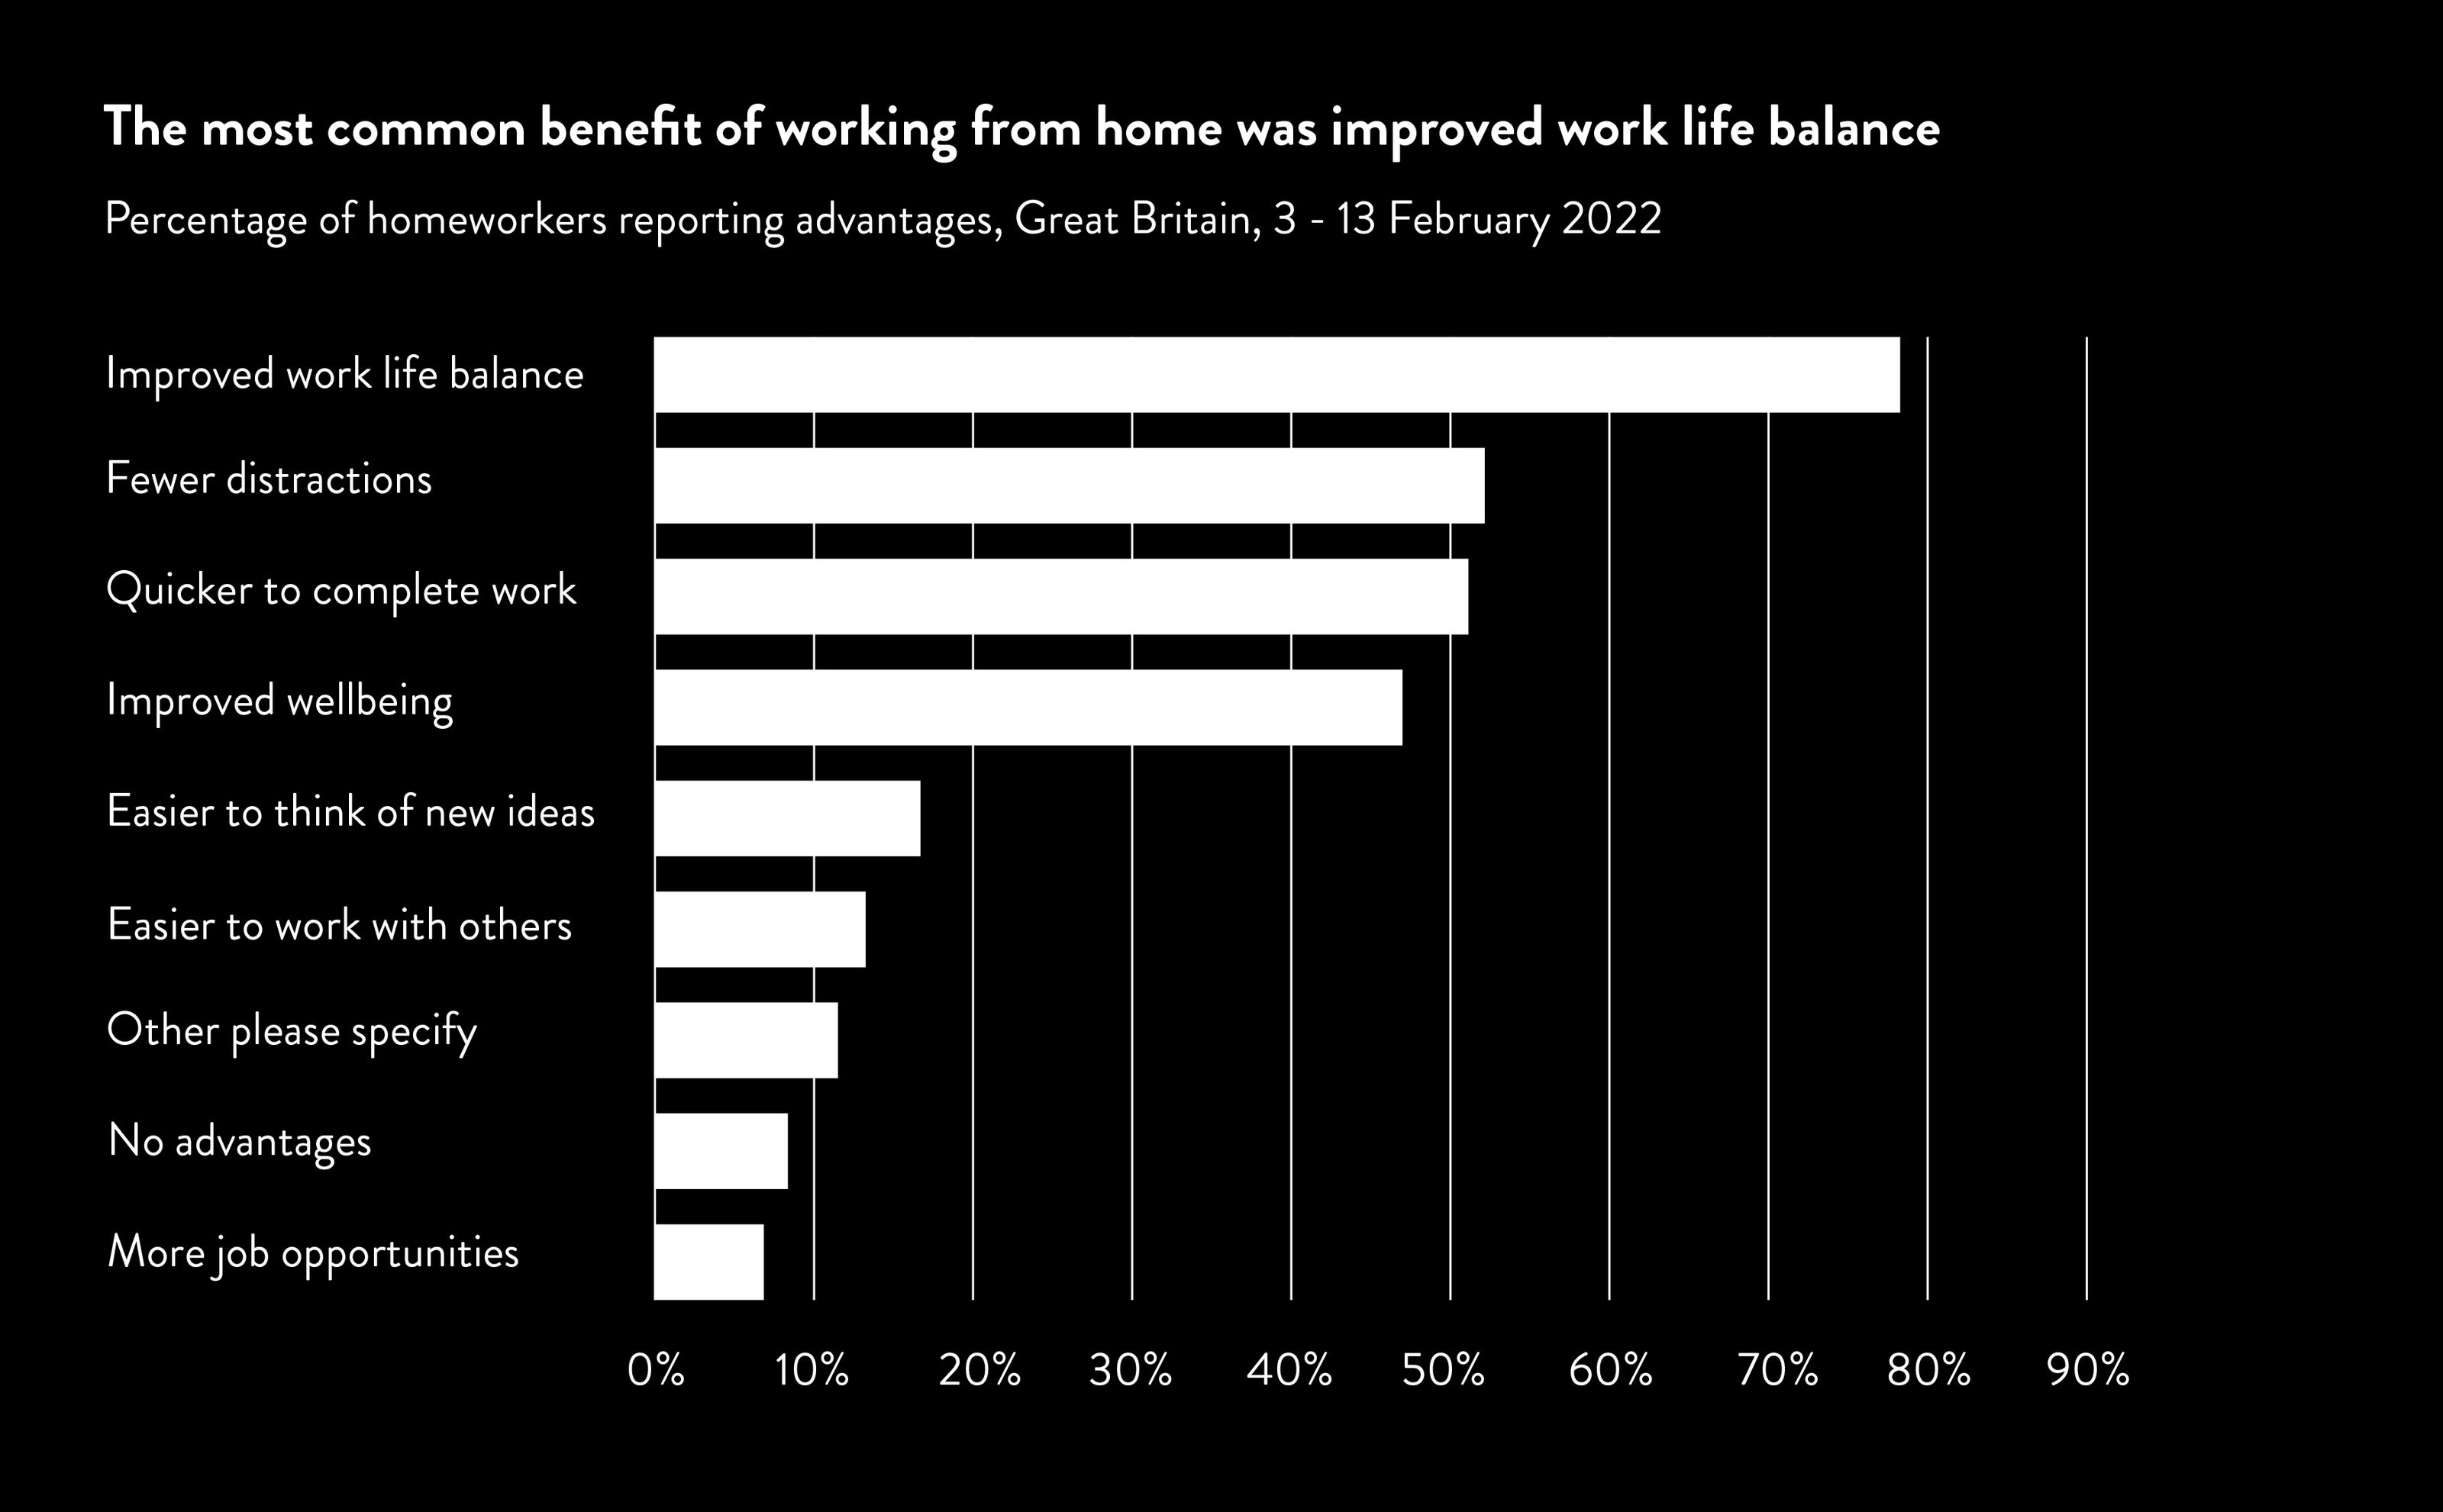 Bar chart showing the most common benefits of working from home. Improved work life balance had a clear majority from respondents.